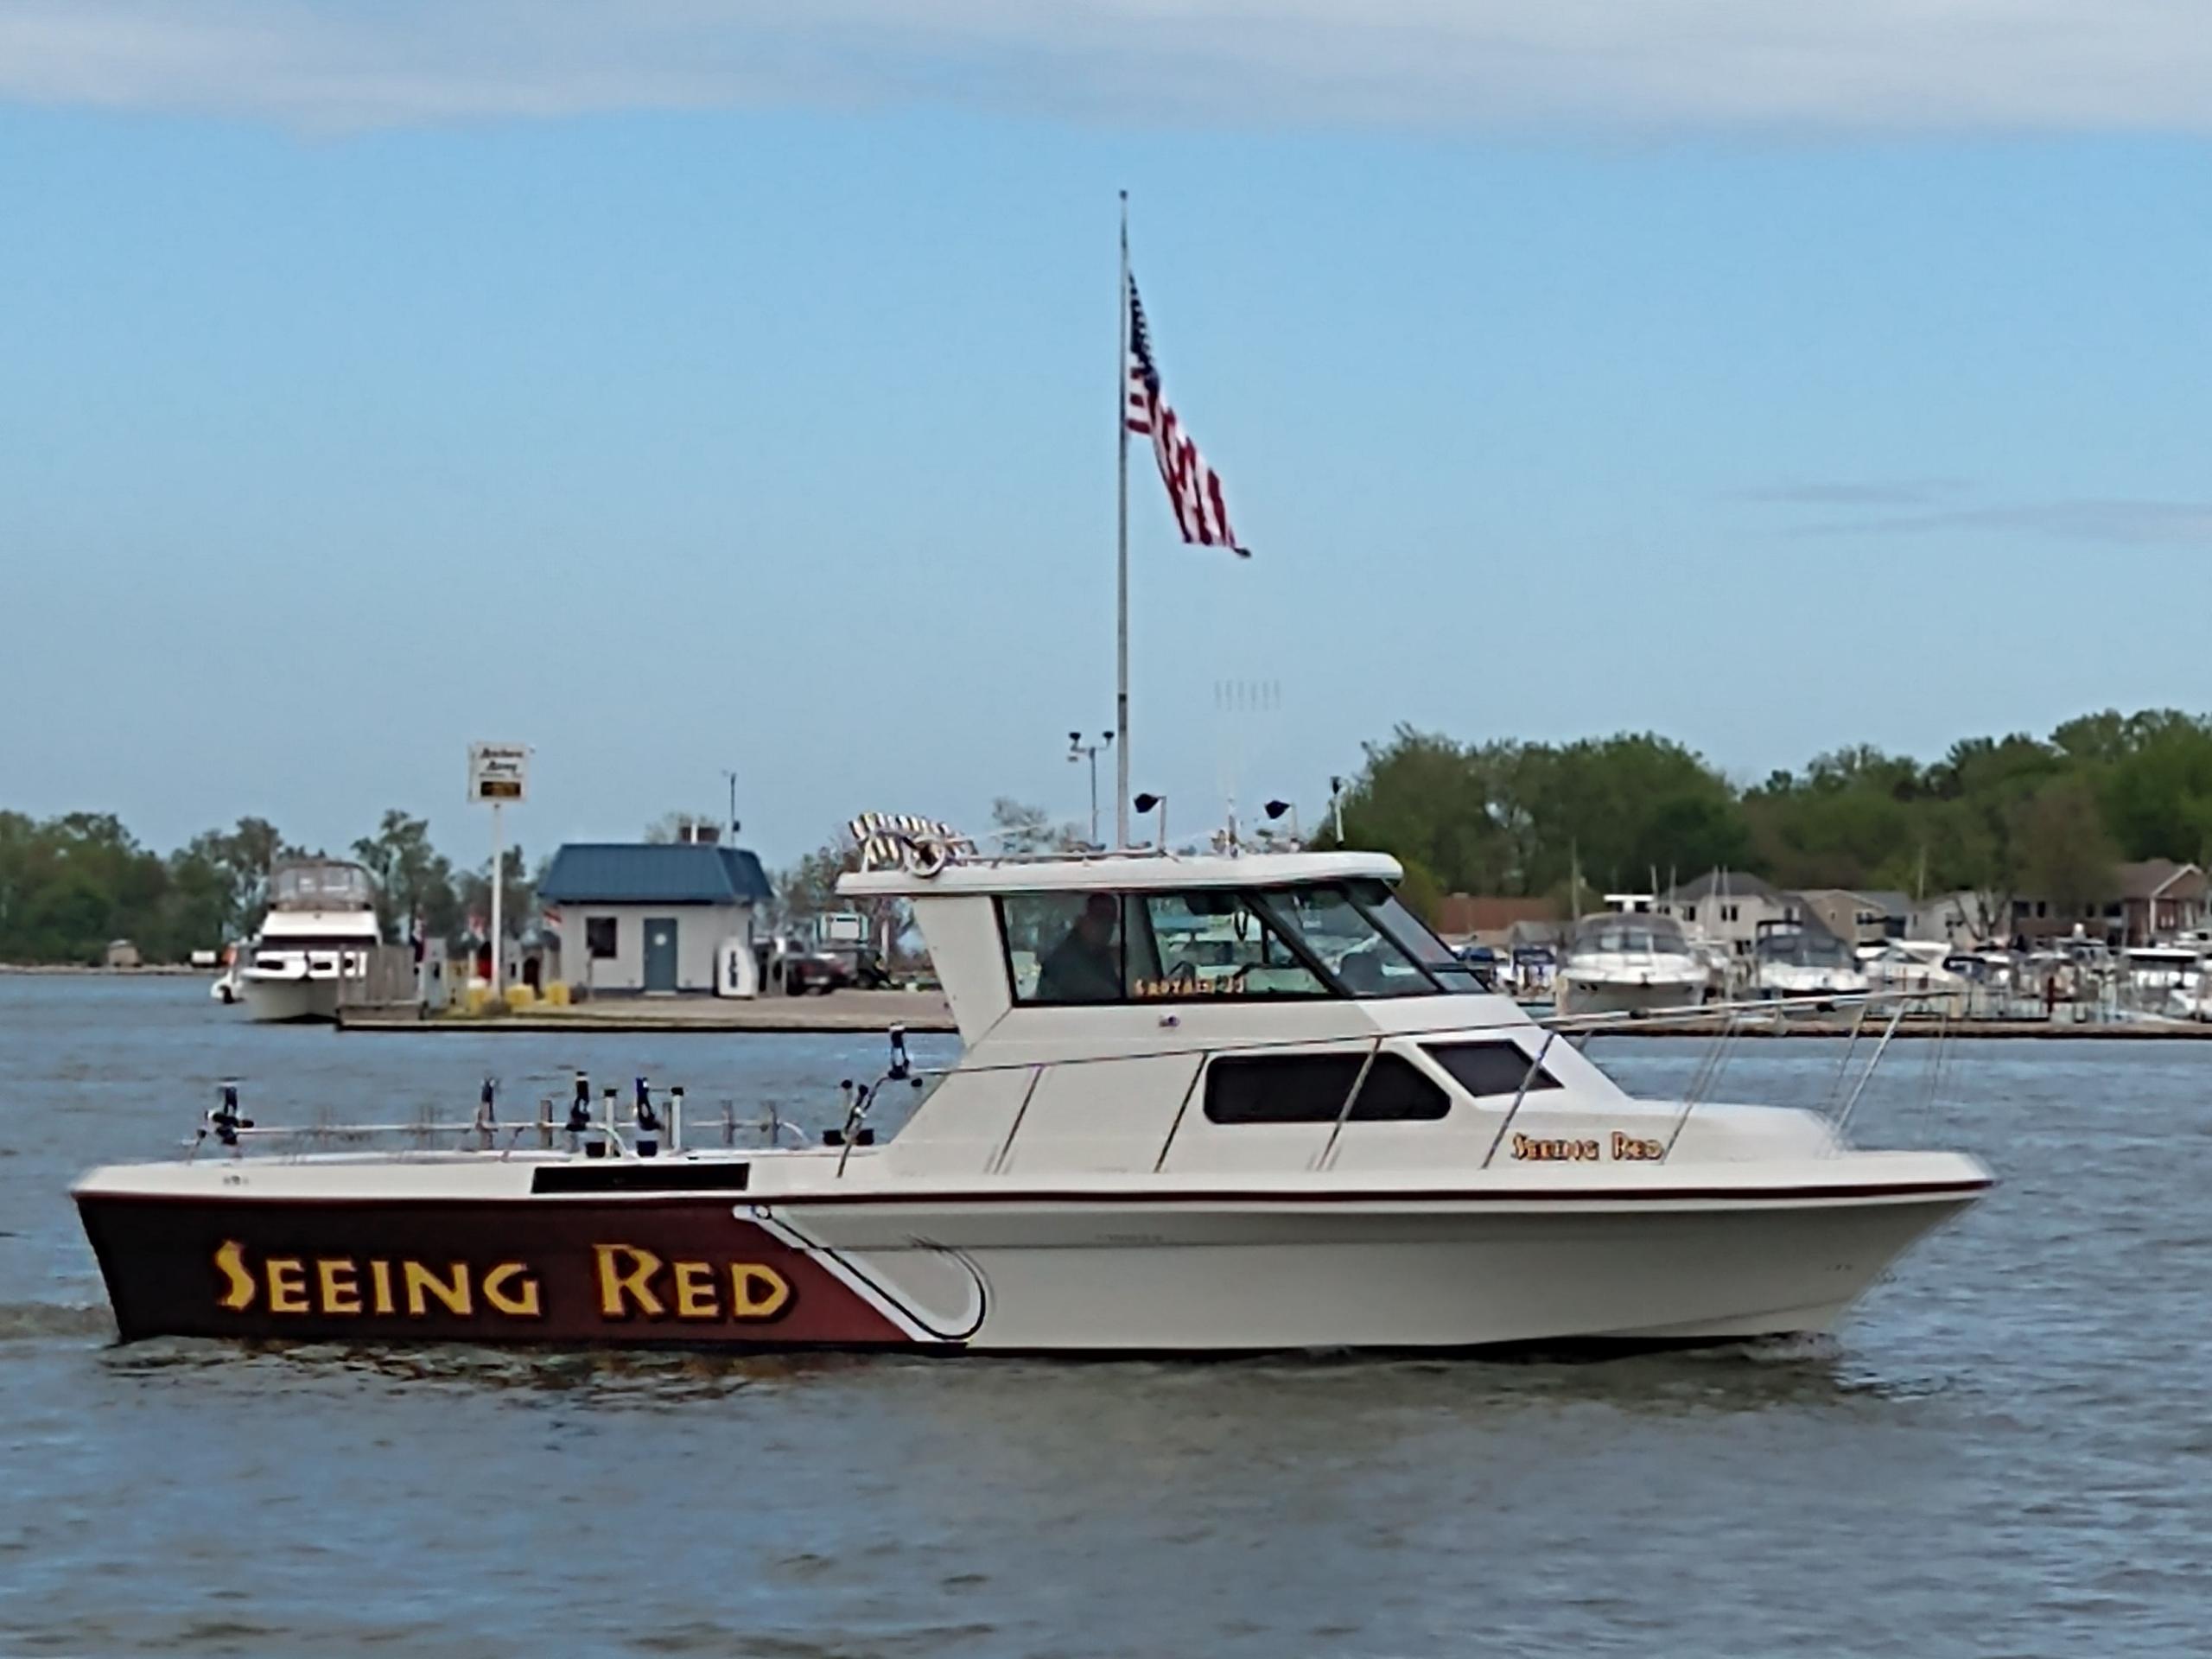 Seeing Red Charters with New Wrap 2020